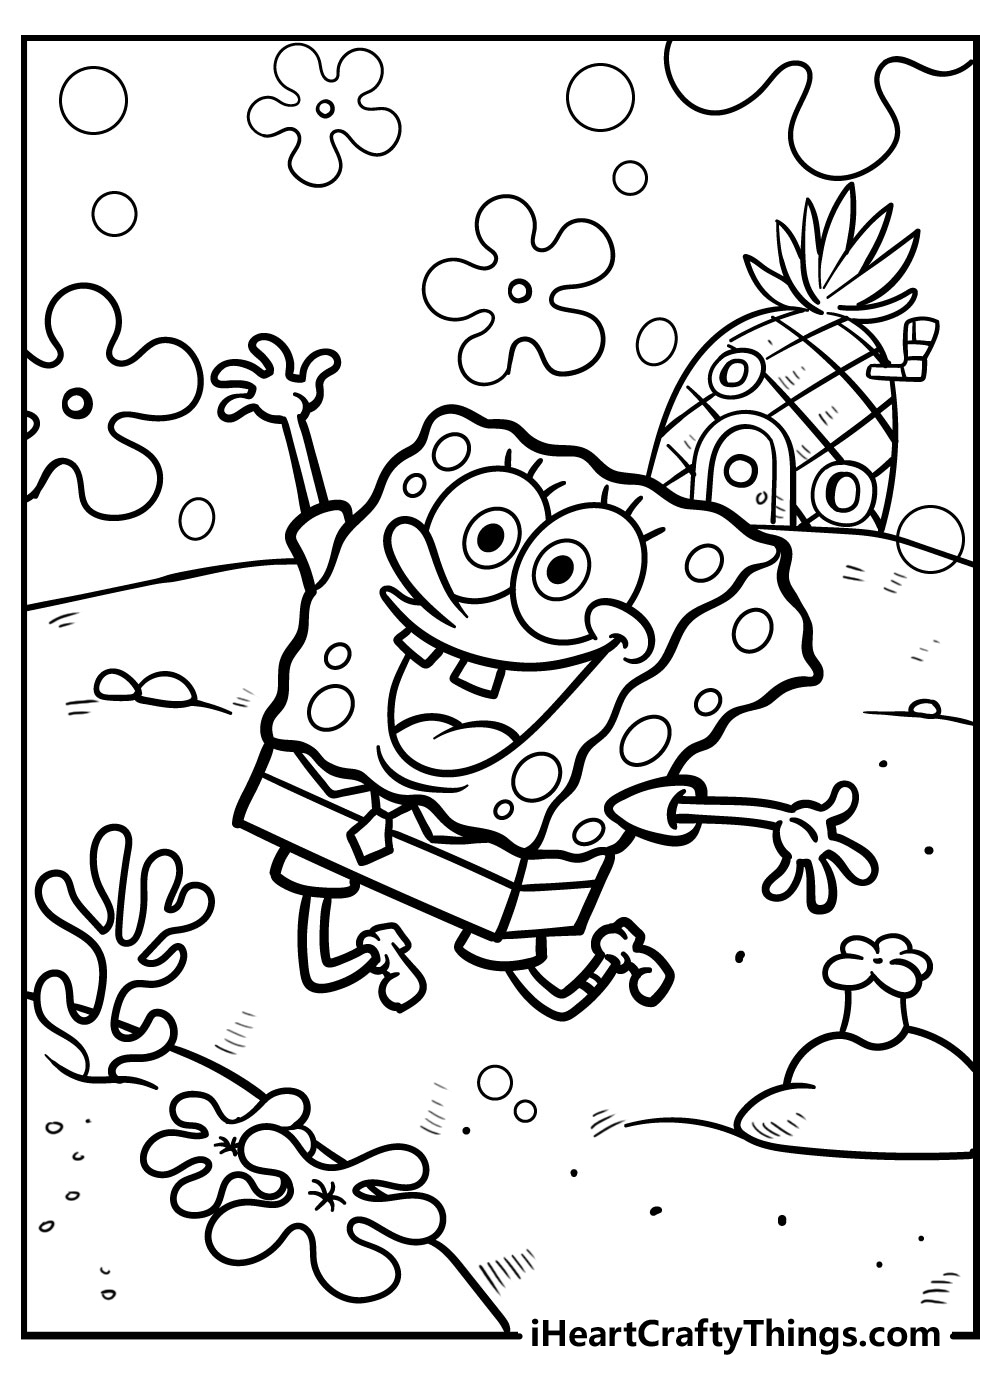 Funny Spongebob Coloring Pages Printables 22